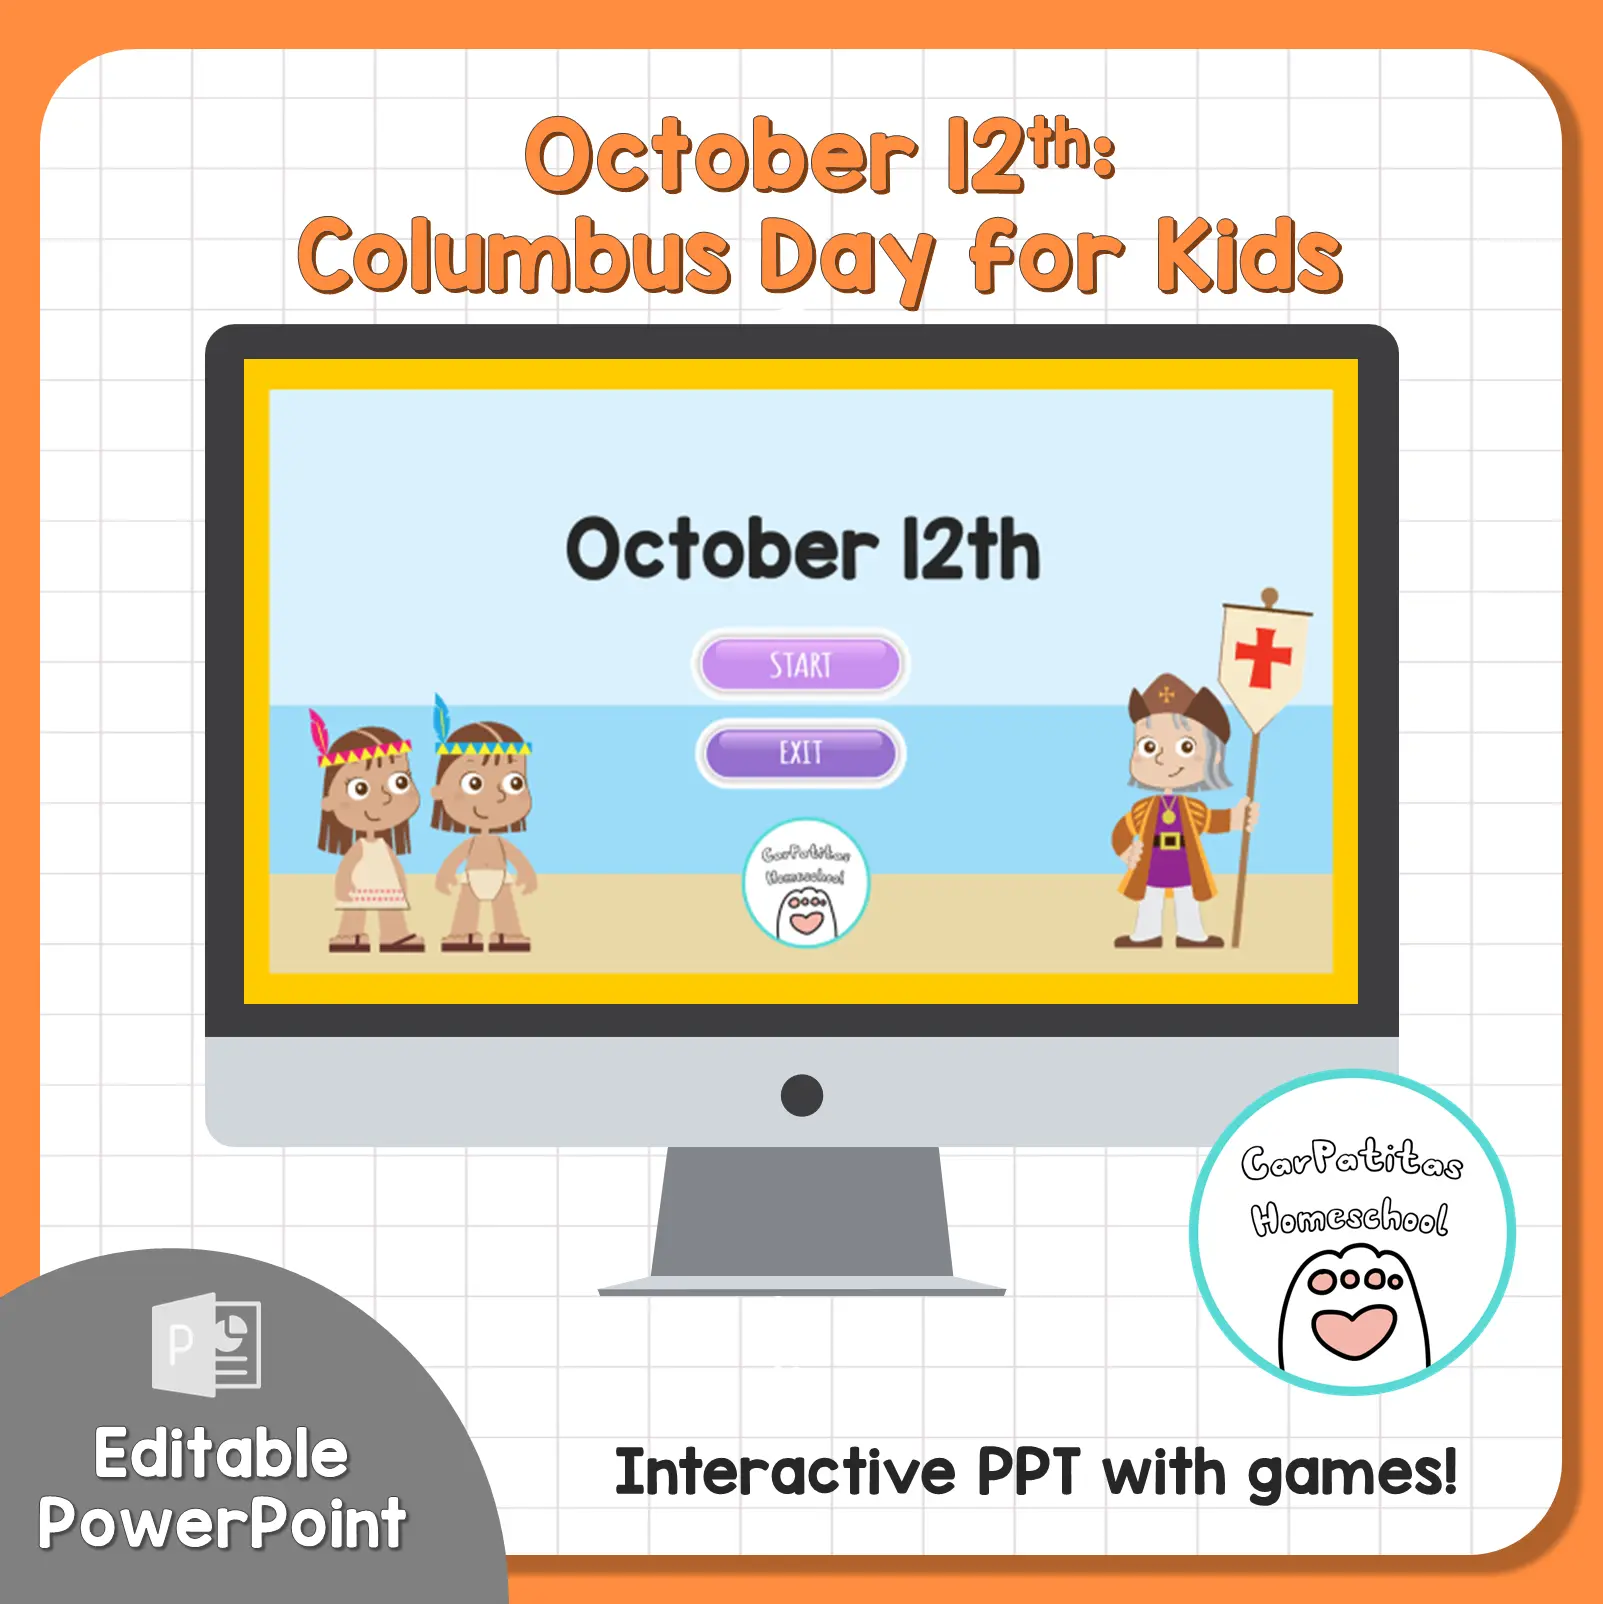 October 12th: Columbus Day For Kids